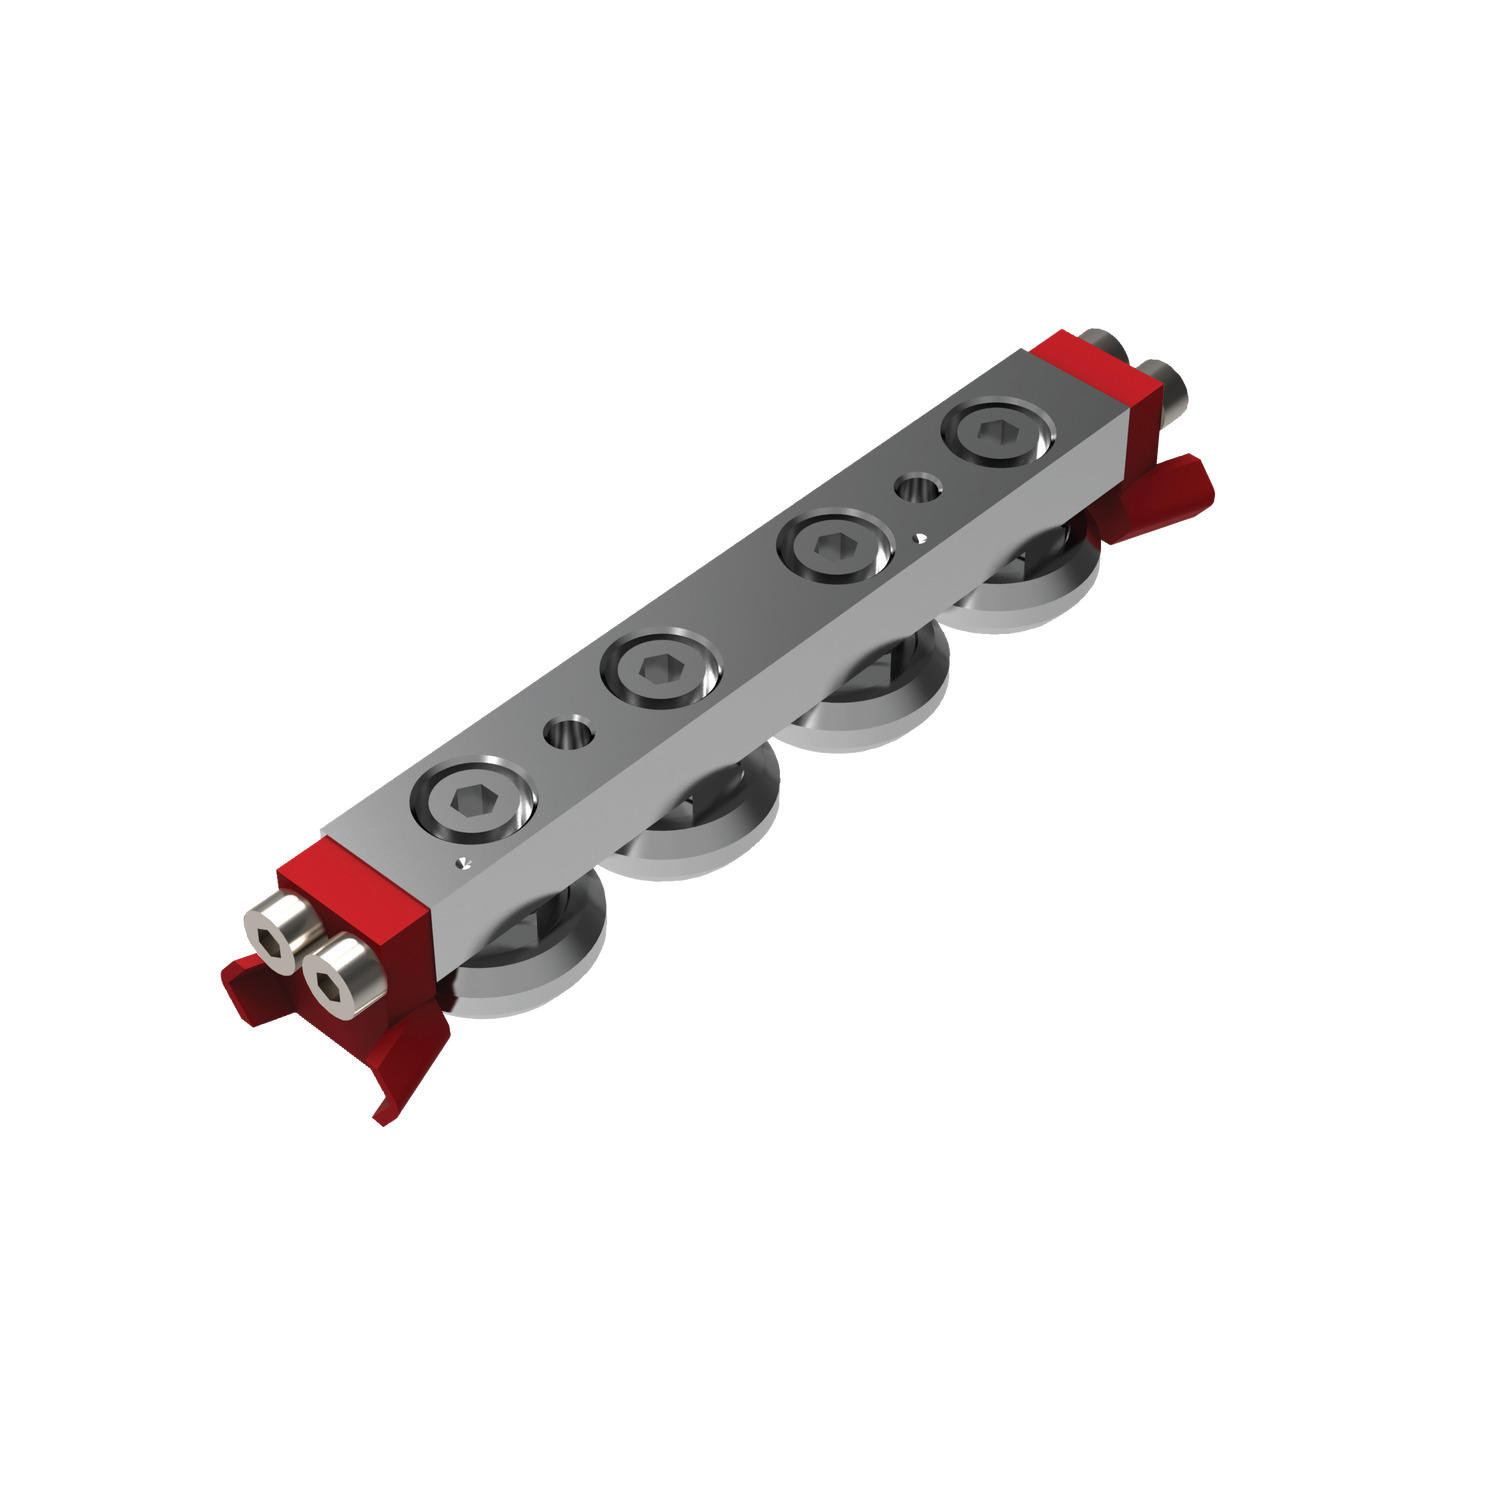 Heavy Duty Sliders - Size 43 Heavy duty compact rail sliders. Front fixing, size 43 with no side seal.